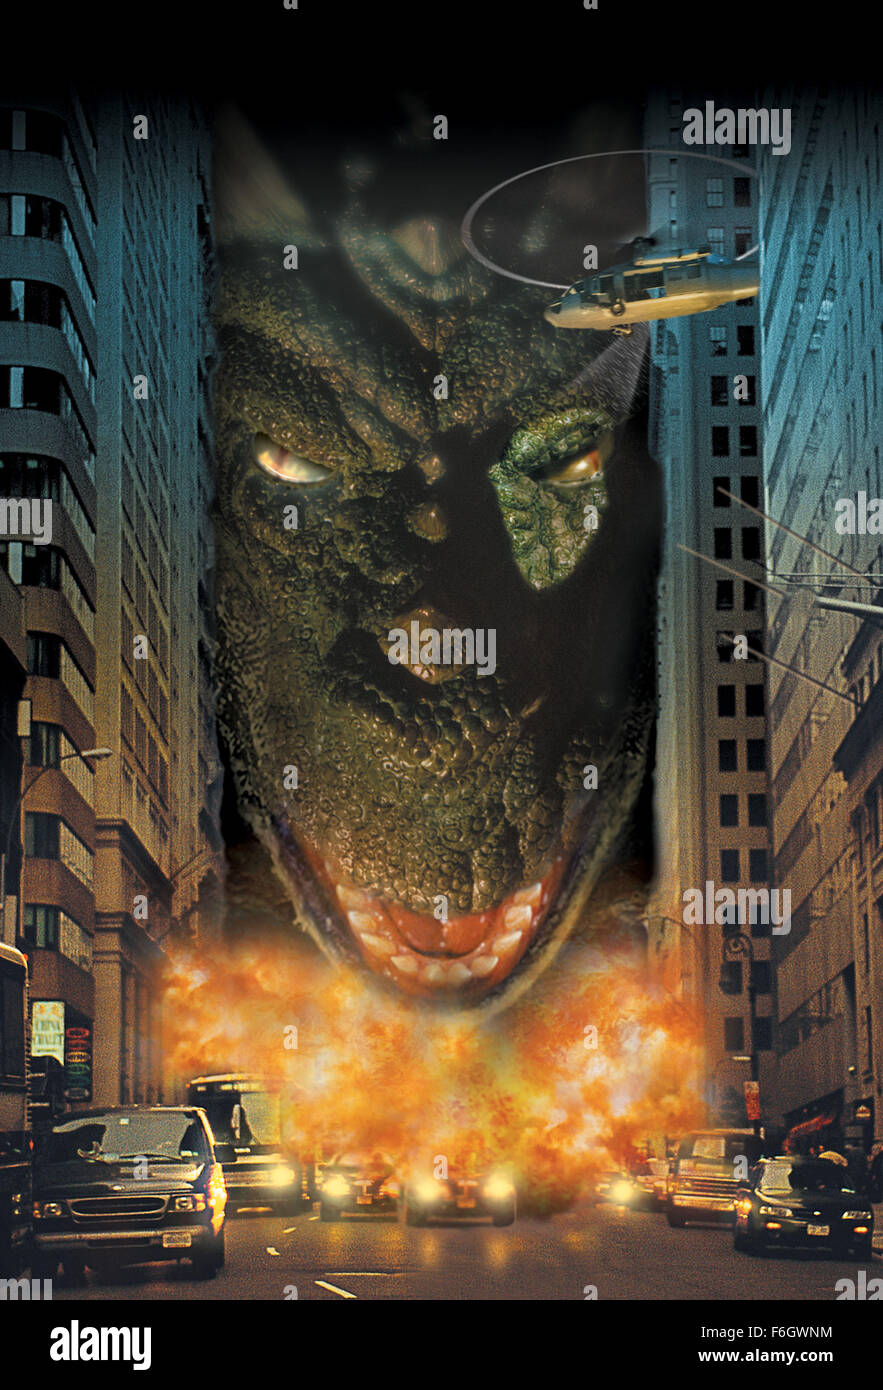 RELEASE DATE: August 21, 2001. MOVIE TITLE: Reptilian. STUDIO: Zero Nine Entertainment. PLOT: A team of scientists working on a remote dig site find the buried body of an enormous monster, perfectly preserved even after 200 million years. As soon as the beast is uncovered, however, an alien spacecraft suddenly appears above them and brings the monster back to life! The creature immediately sets about levelling the surrounding urban landscape and shrugging off the best firepower the military can throw at it. A lone scientist, working on decrypting an ancient set of hieroglyphics, may be on the Stock Photo